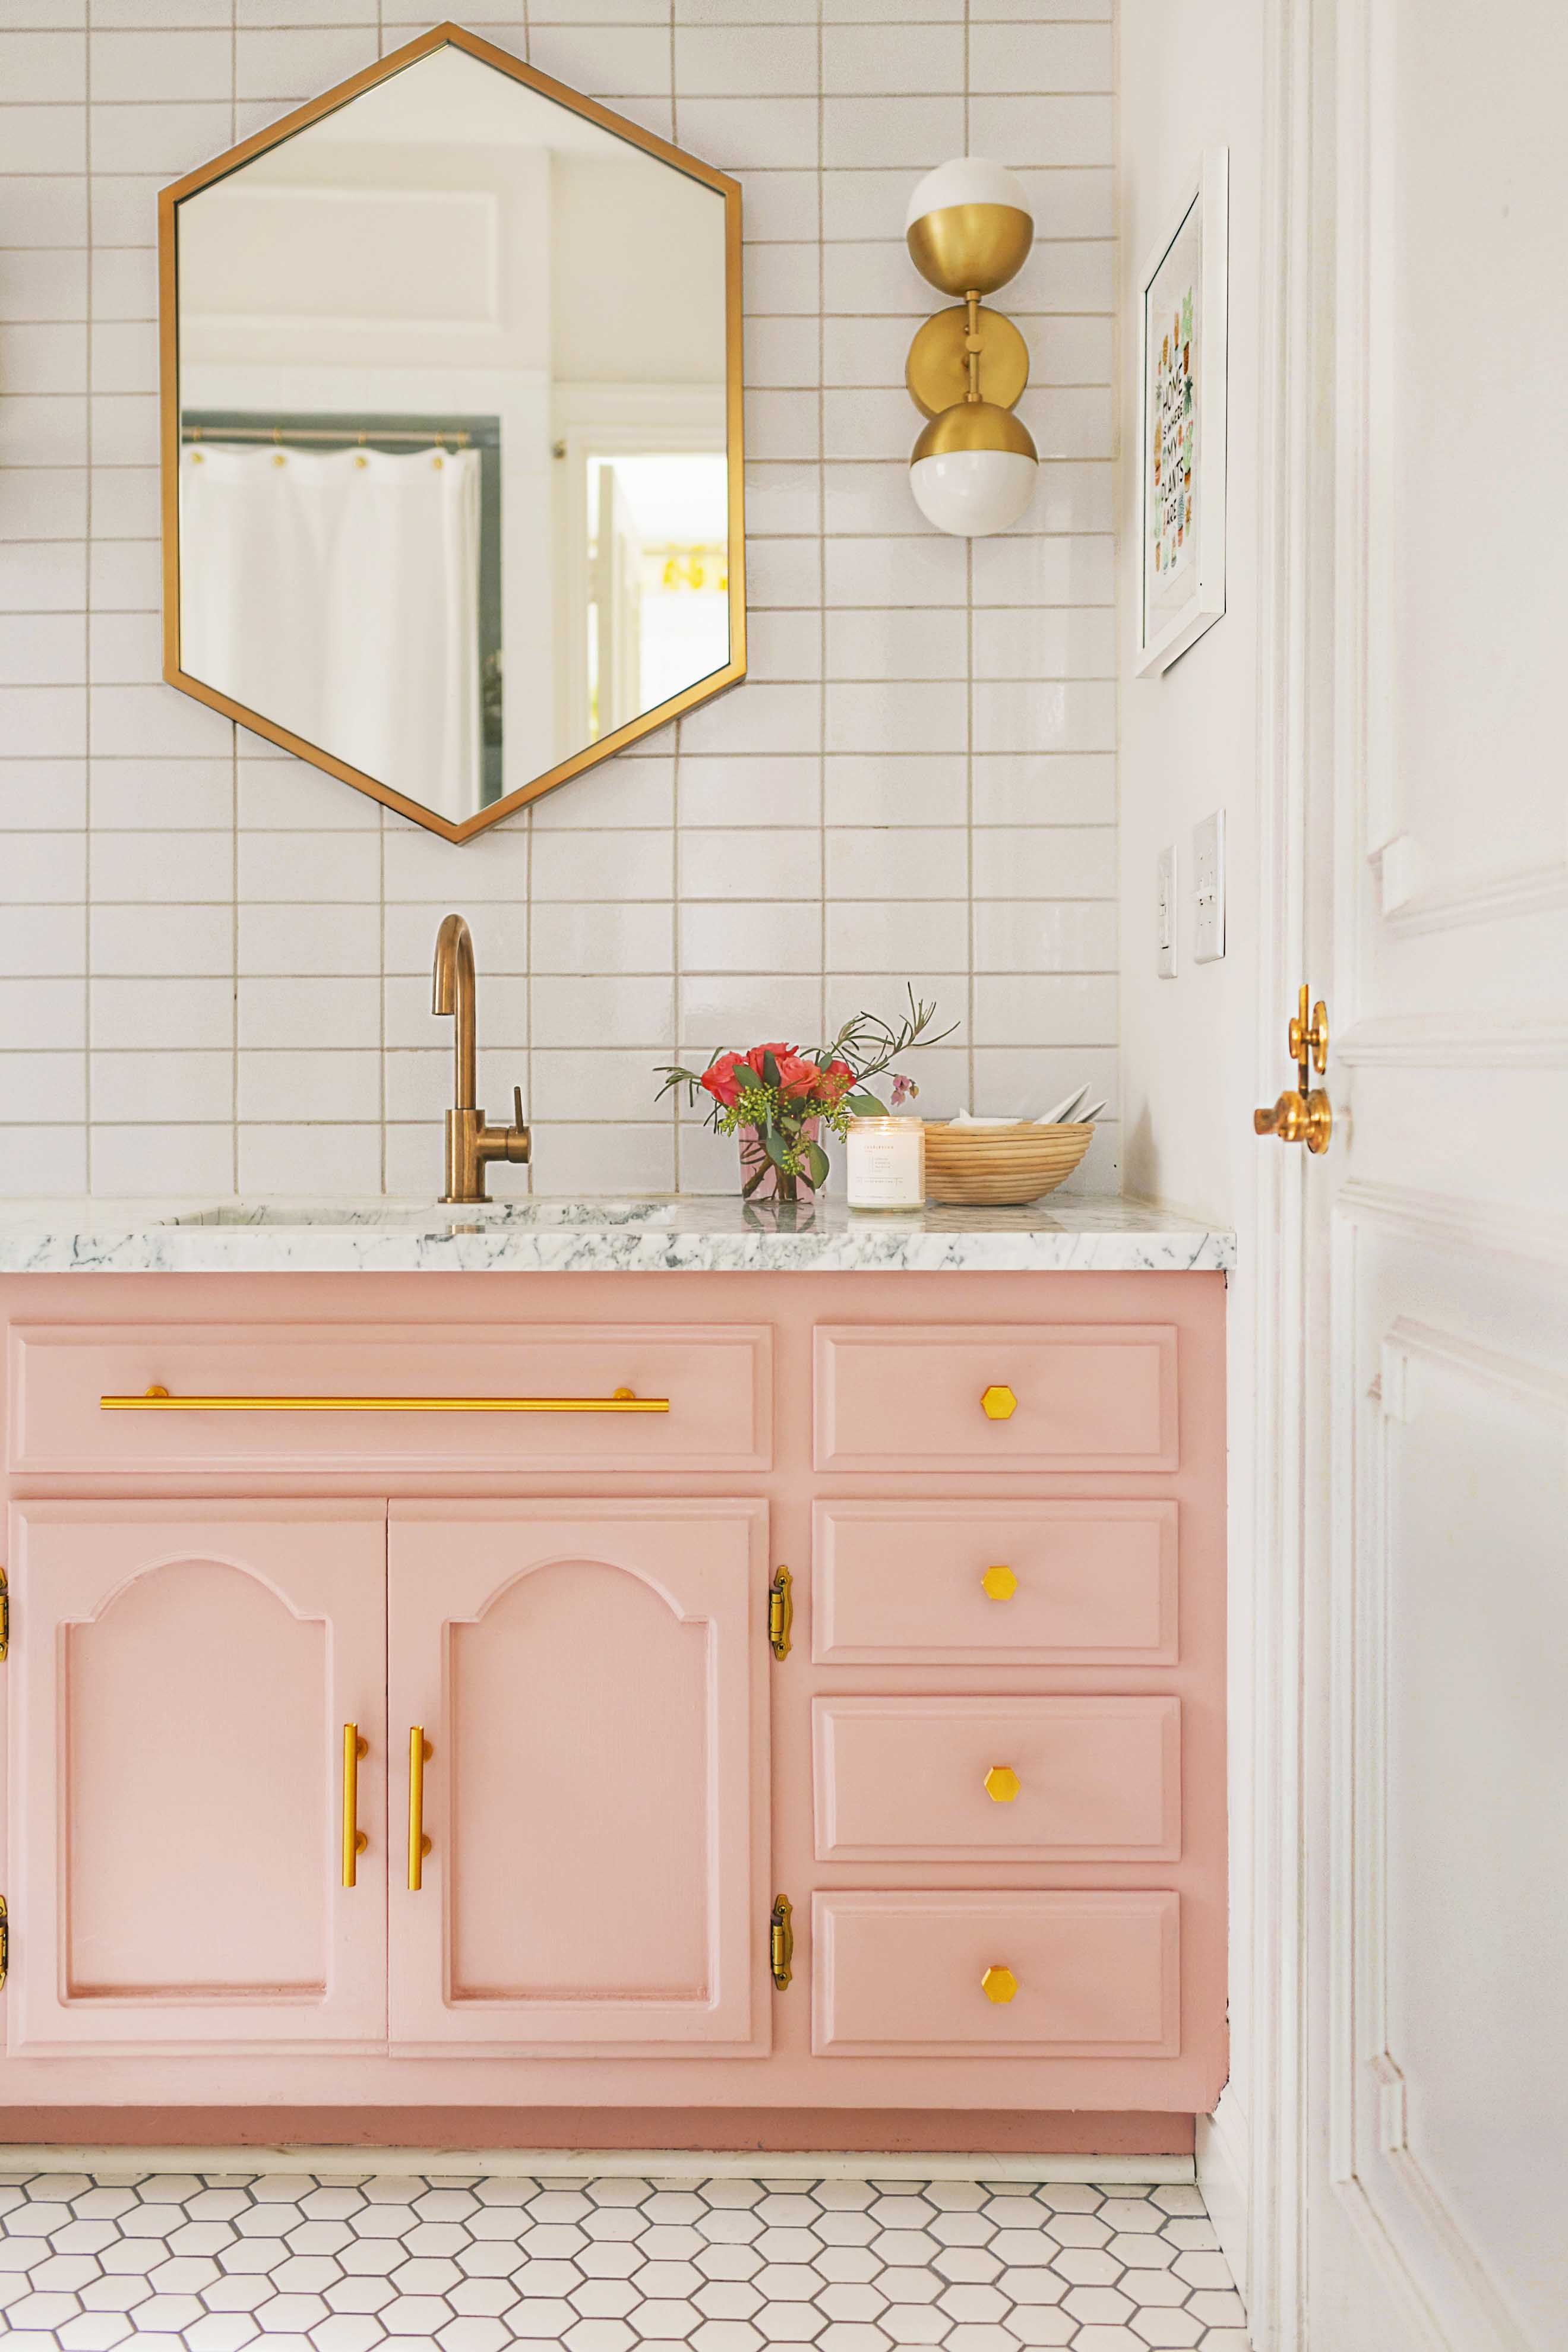 Where to Put Towels in a Small Bathroom - Decor Snob